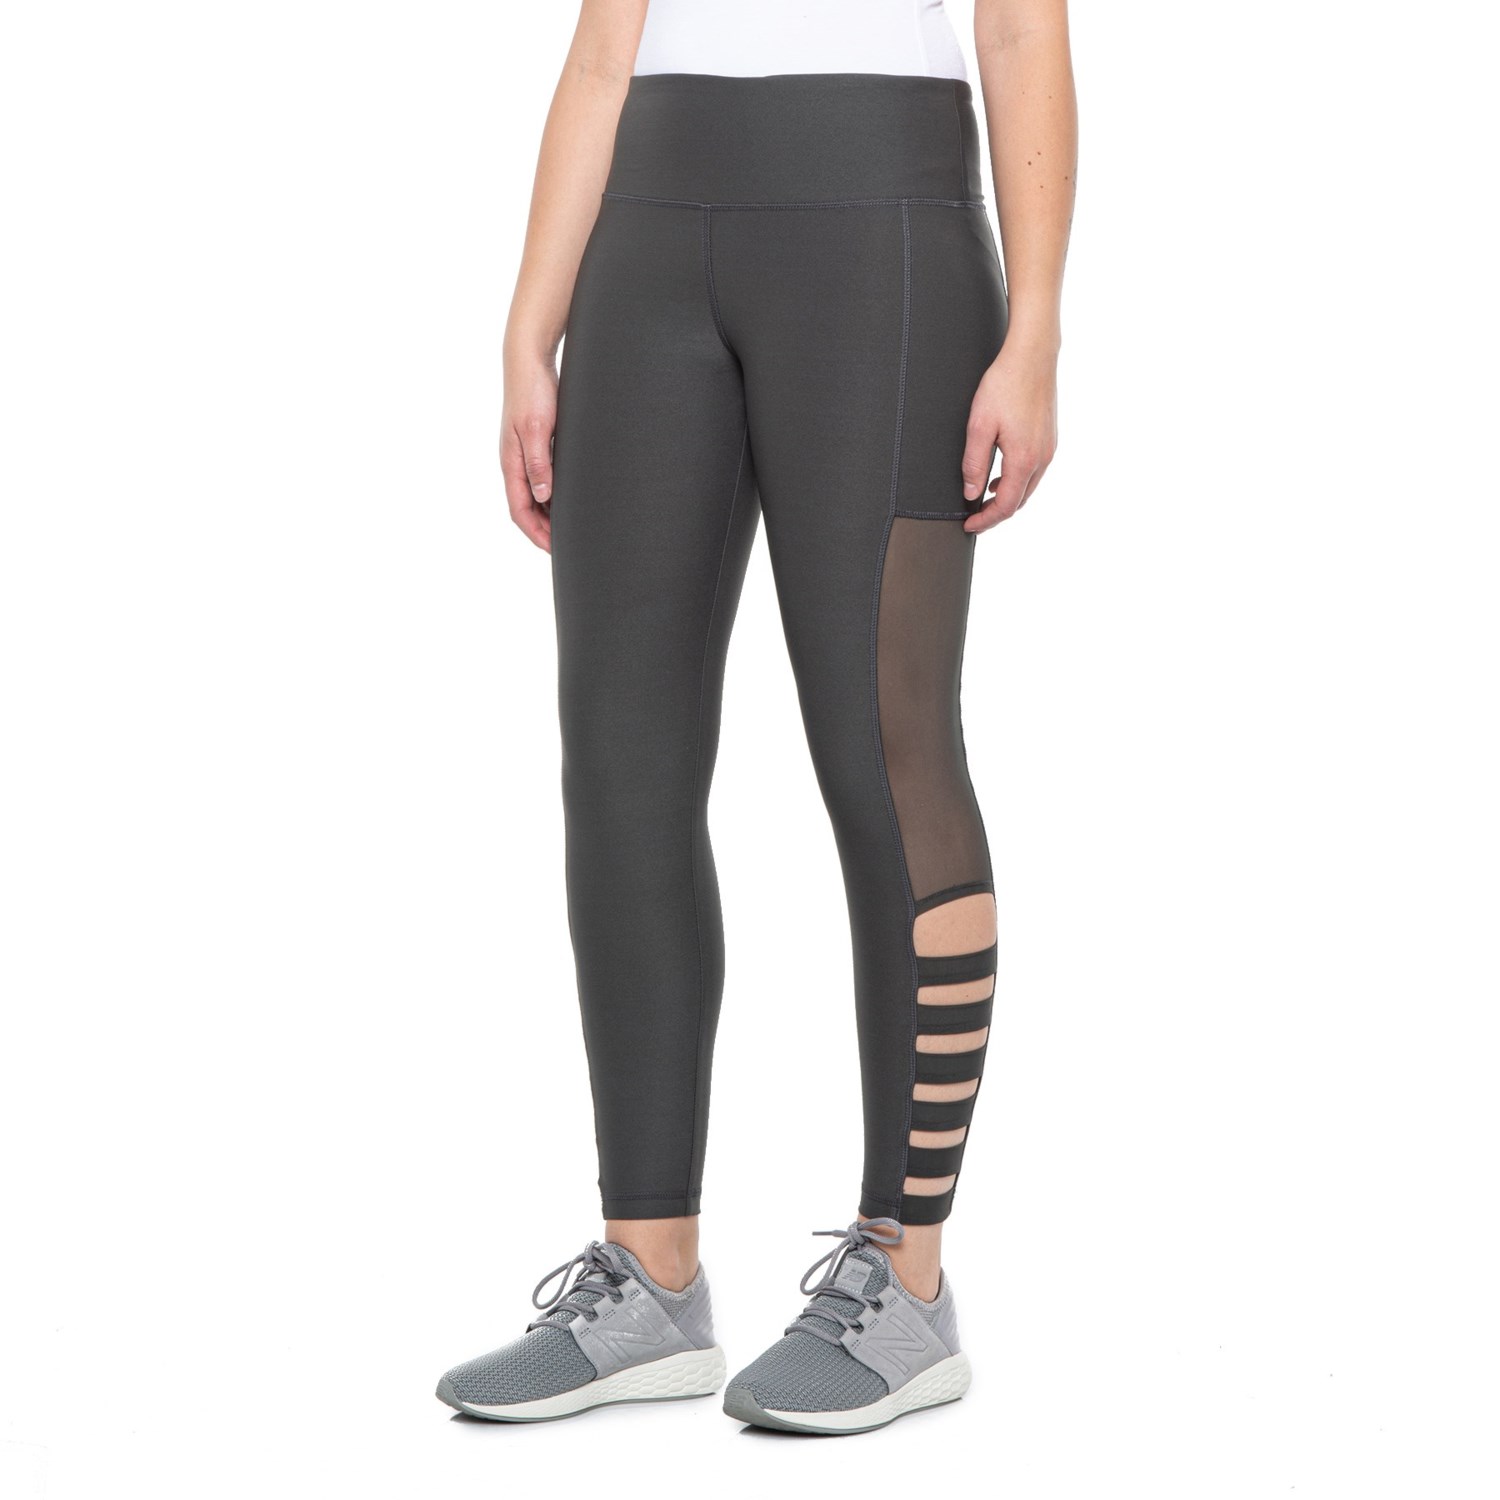 Absolutely Fit Mesh and Lattice Leggings (For Women) - Save 57%